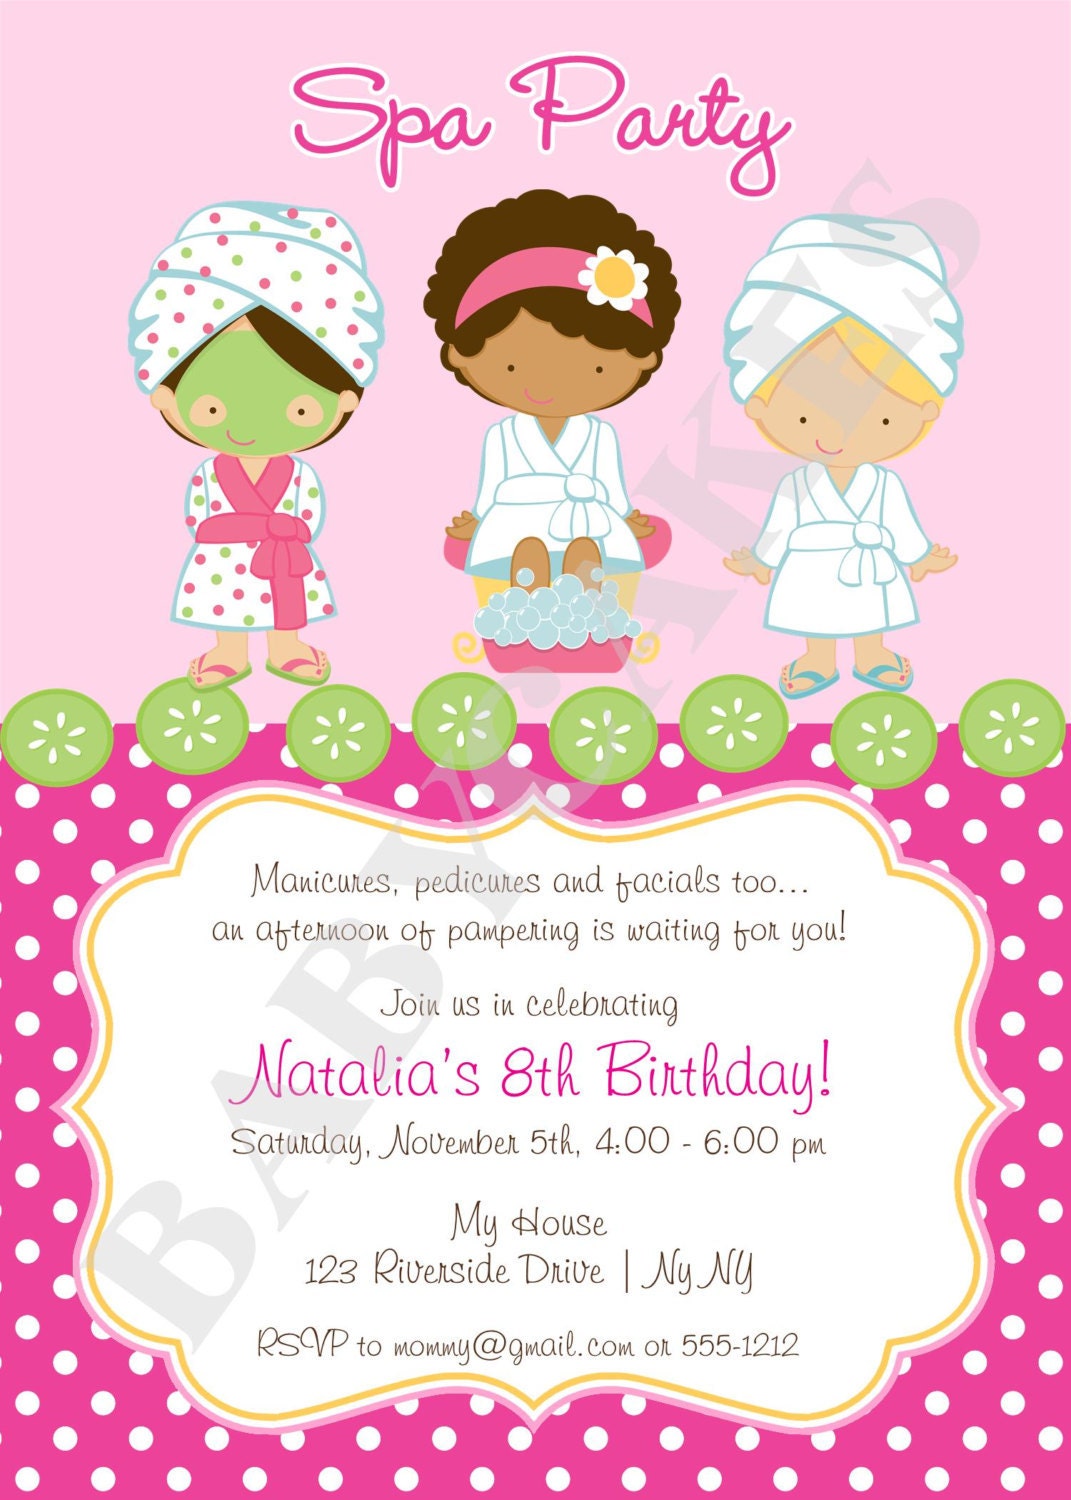 Free Printable Spa Party Invitations Templates 4